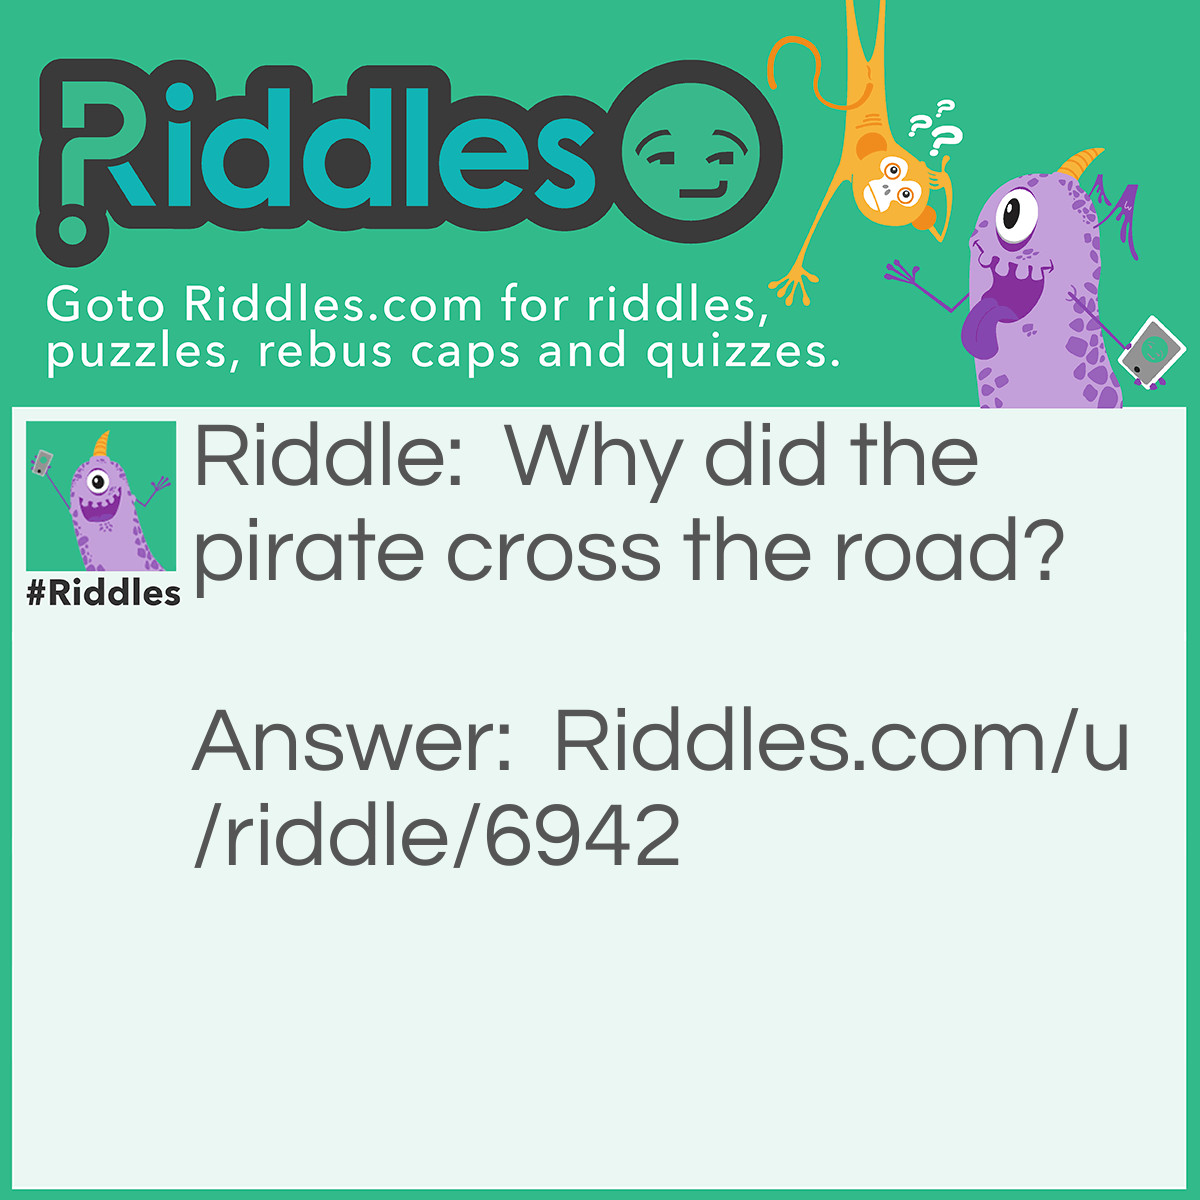 Riddle: Why did the pirate cross the road? Answer: So he doesn't forget where he buried his gold!